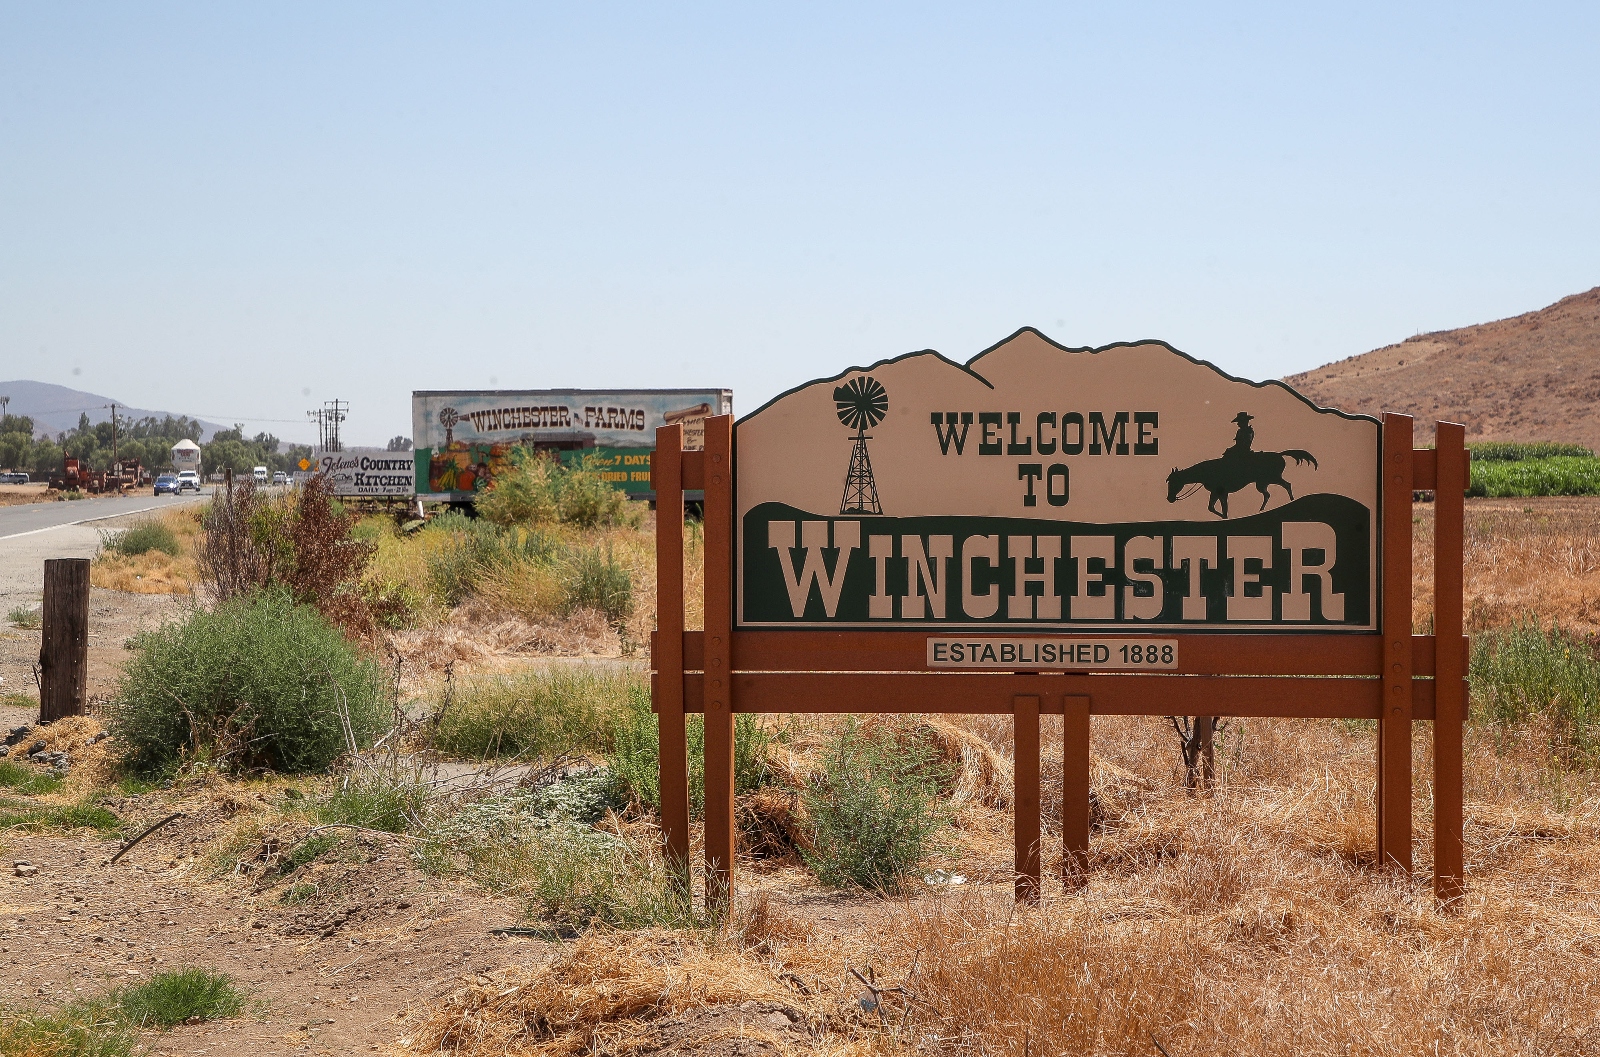 A welcome sign on the roadside for Winchester, California